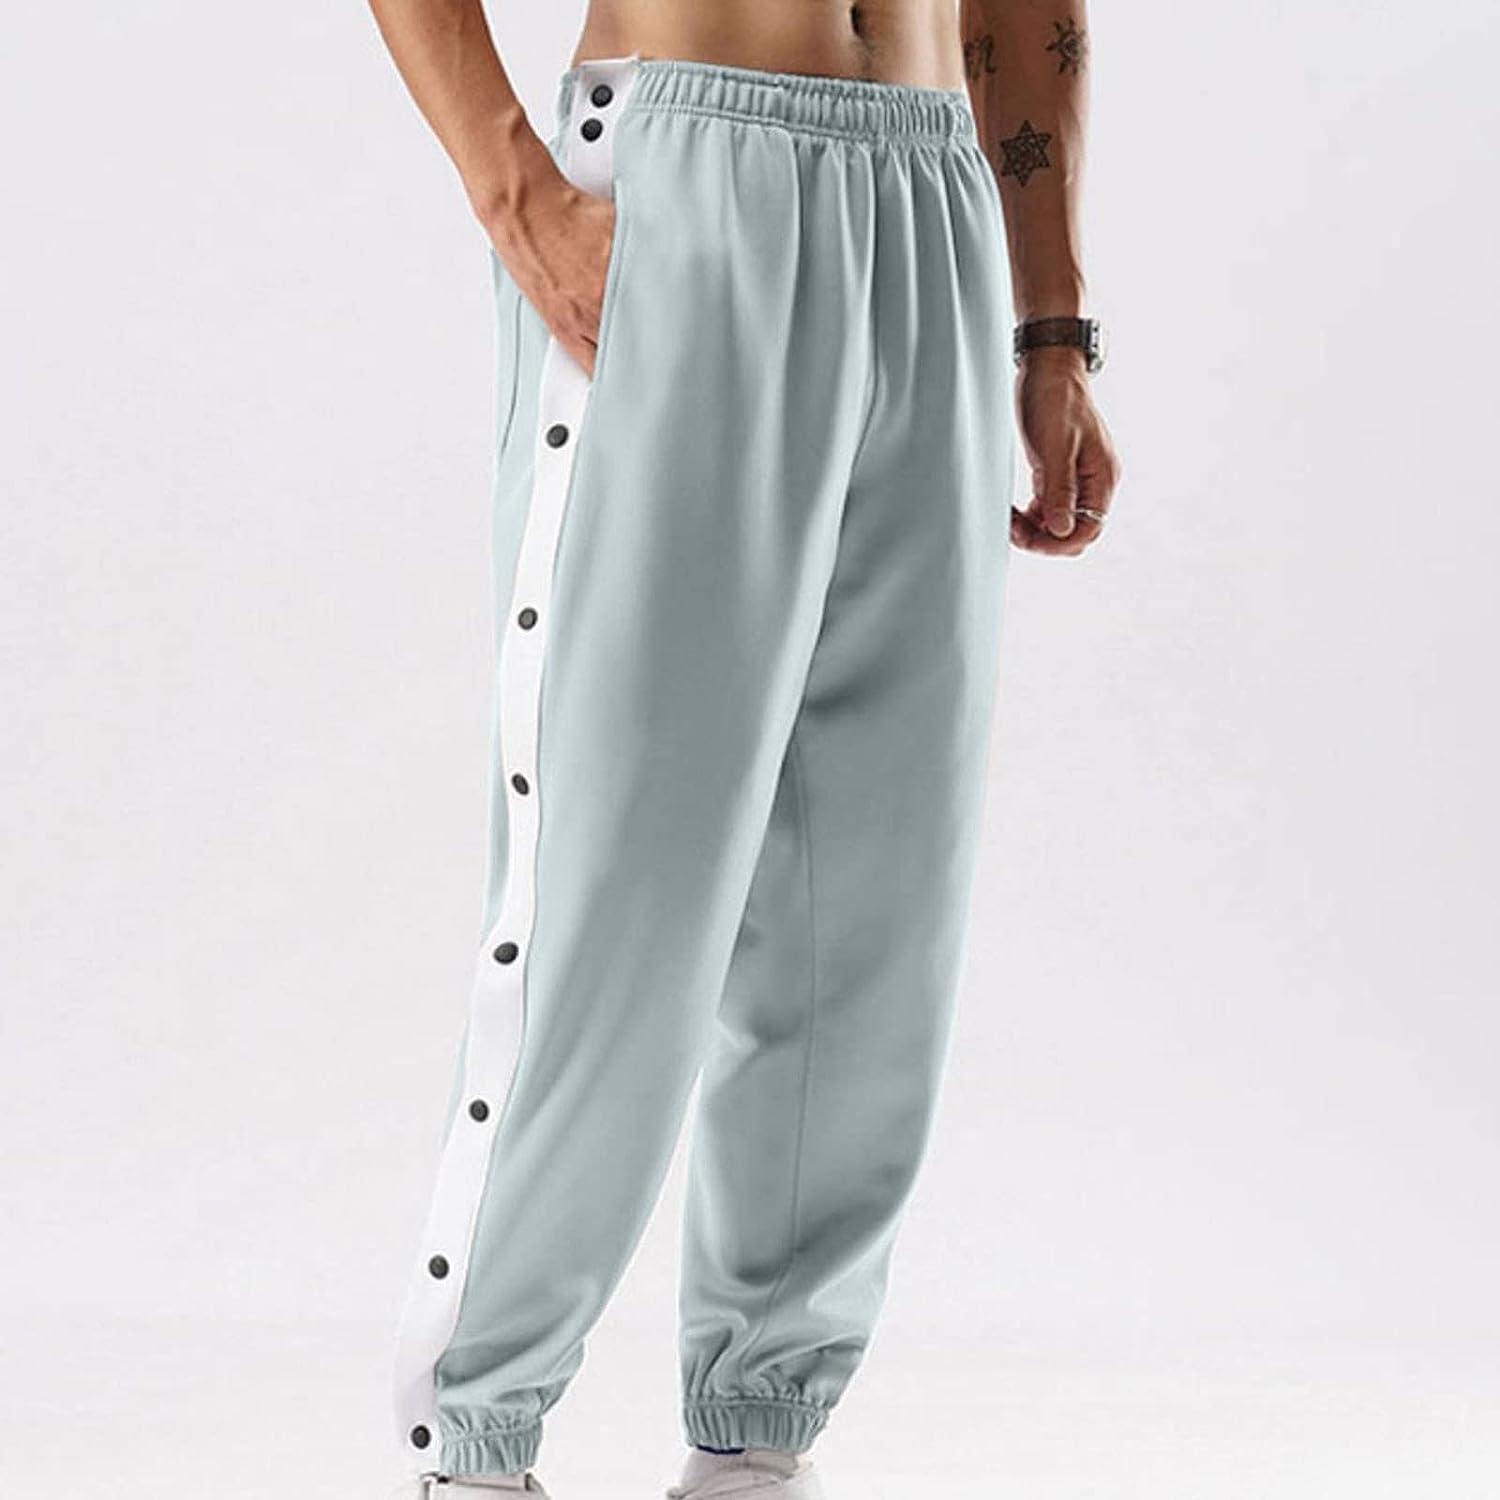 Boy Outdoor Men's Tear Away Pants Basketball Casual Training Pant Warm Up  Loose Casual Open Leg Sweatpants with Pockets Grey Small